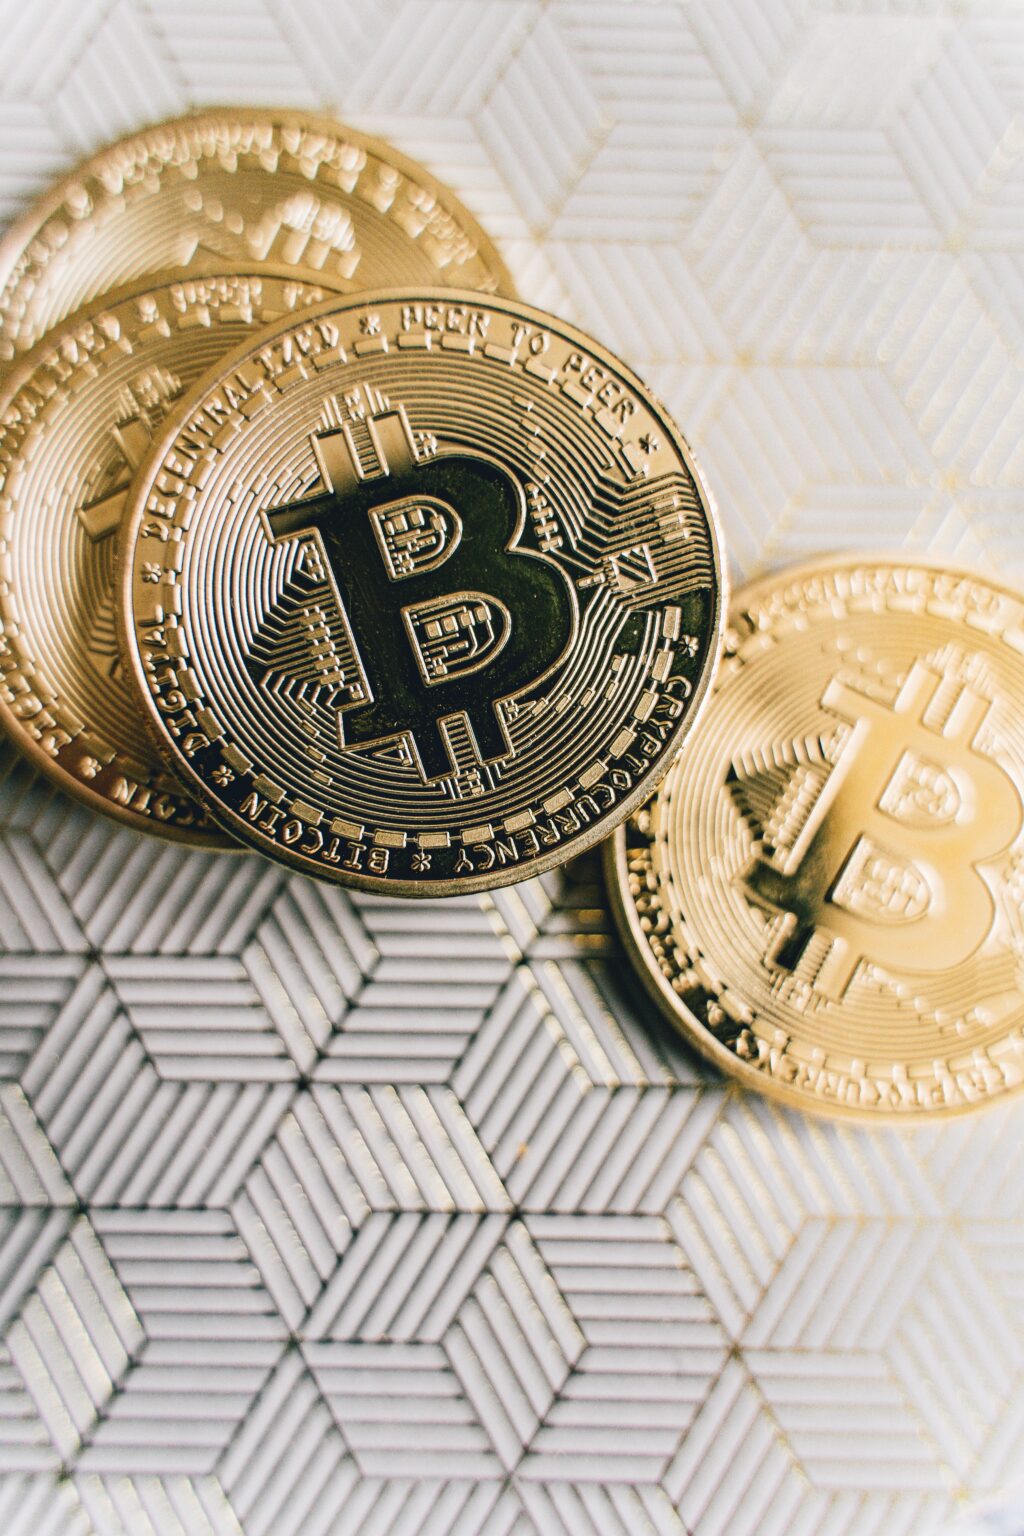 bitcoins on white and gold paper